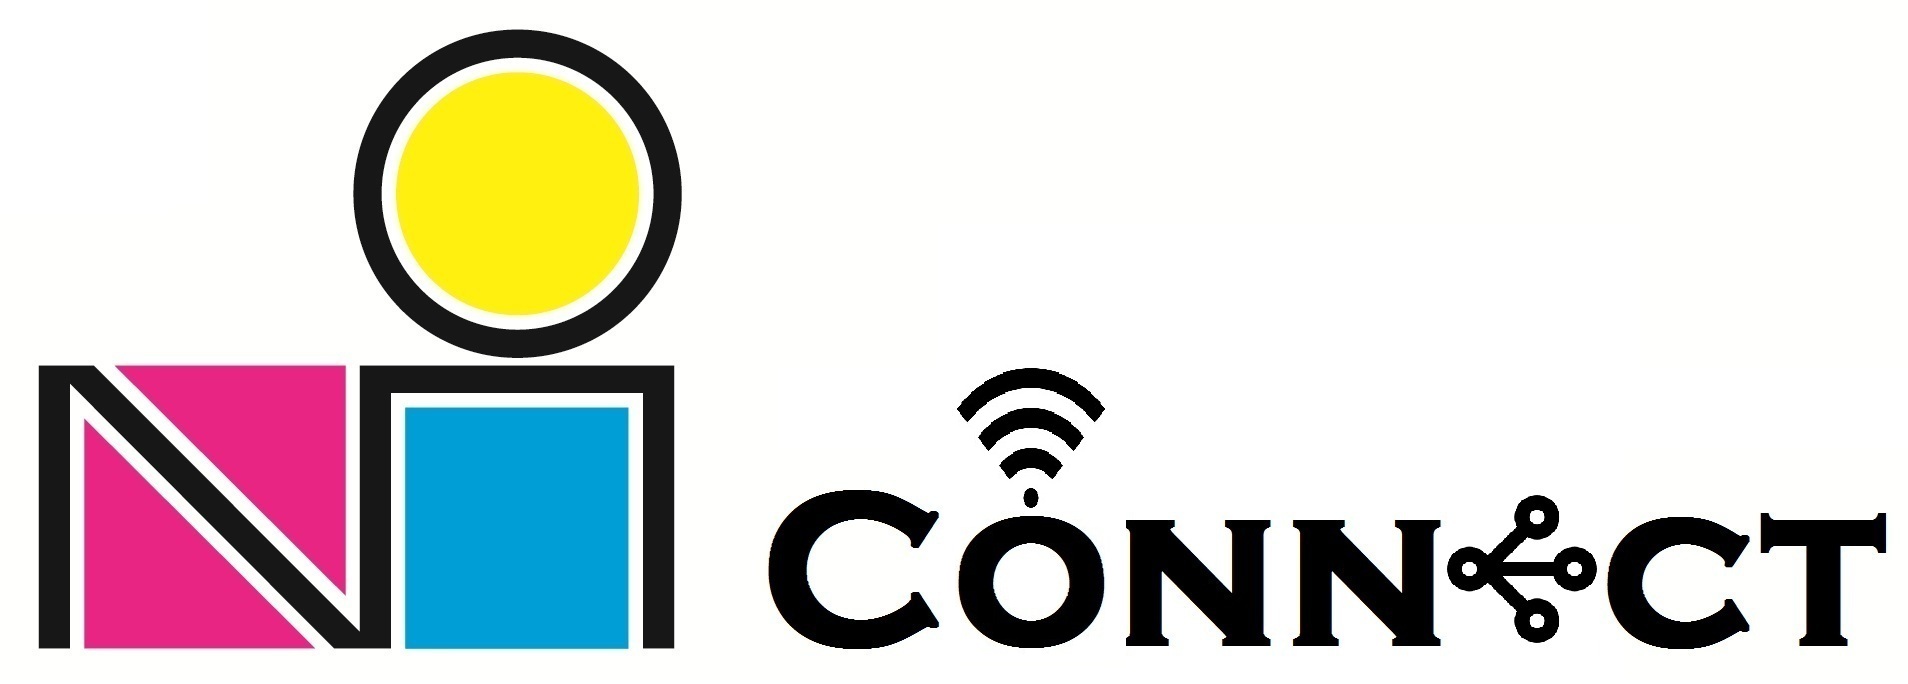 Ni Connect Banner Final Version 20190401 Test F Ver1